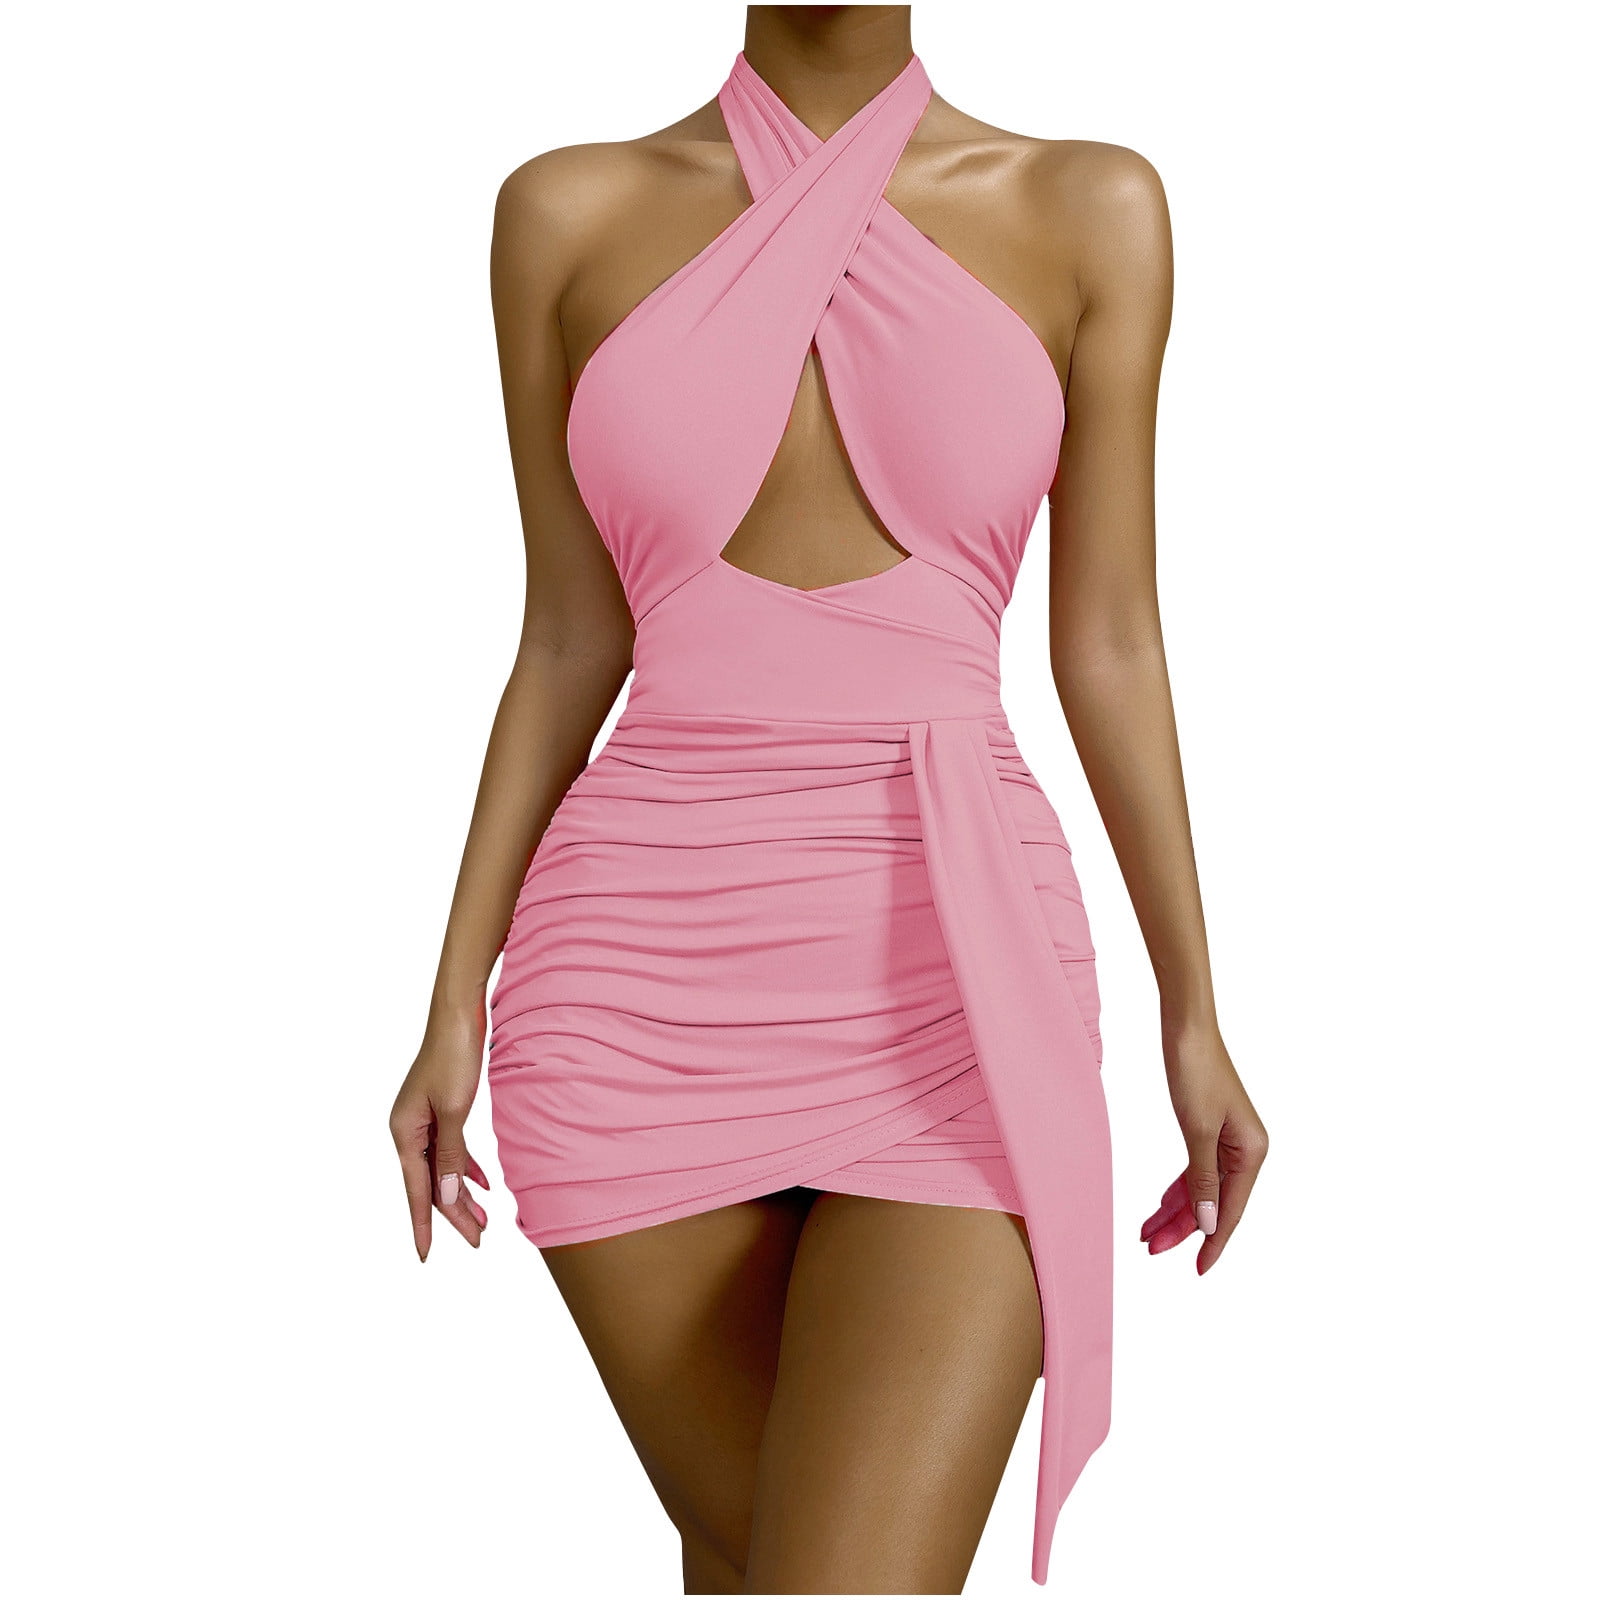 Women's Sexy Backless Halter Neck Bodycon Mini Dress Evening Party Club  Dresses